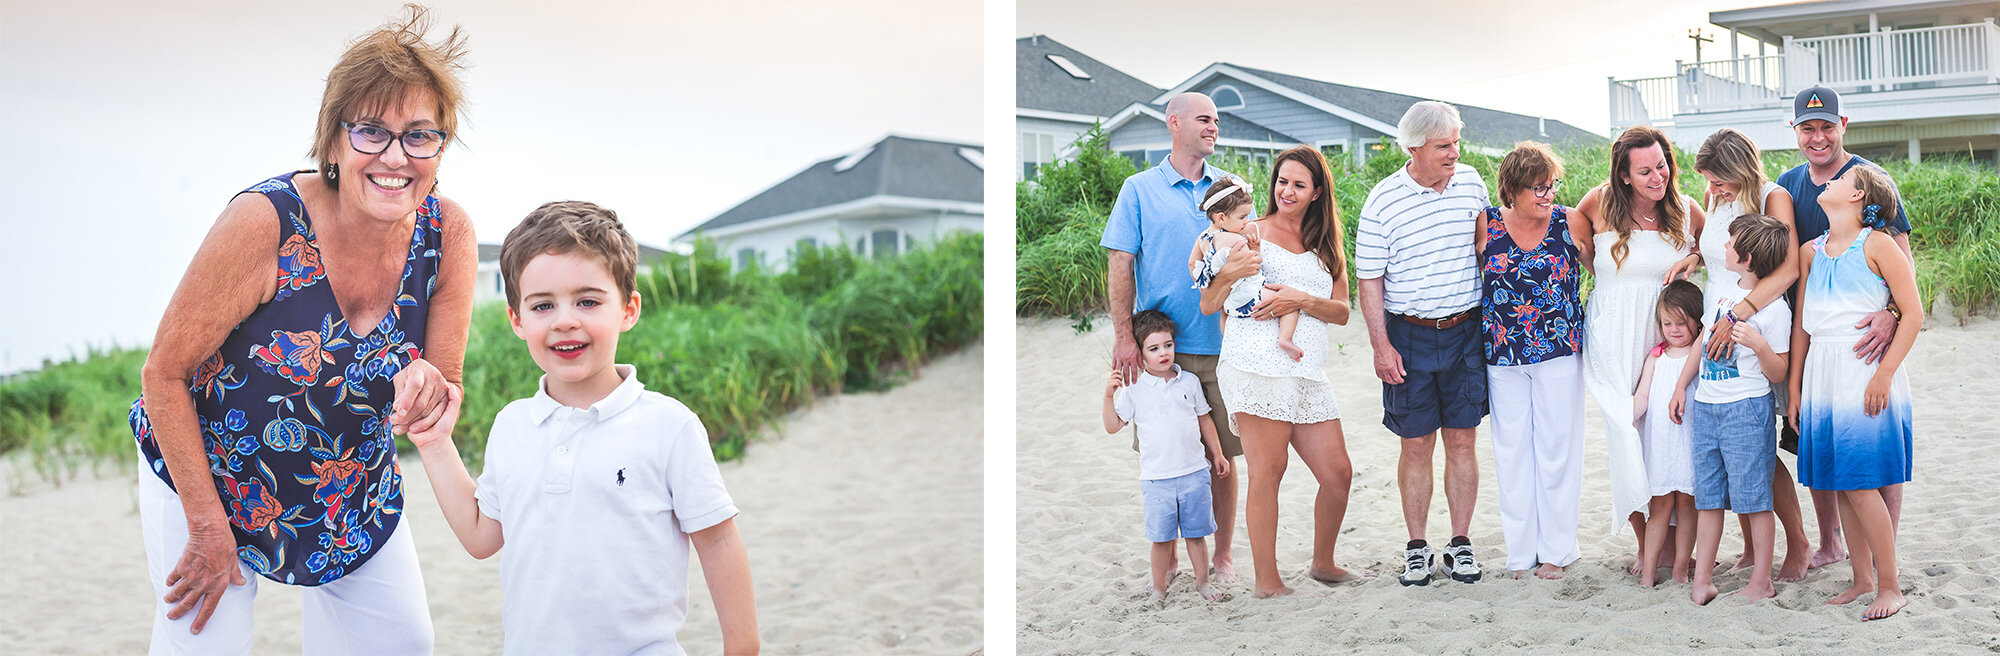 Boston Kids Birthday Family Pictures | Stephen Grant Photography